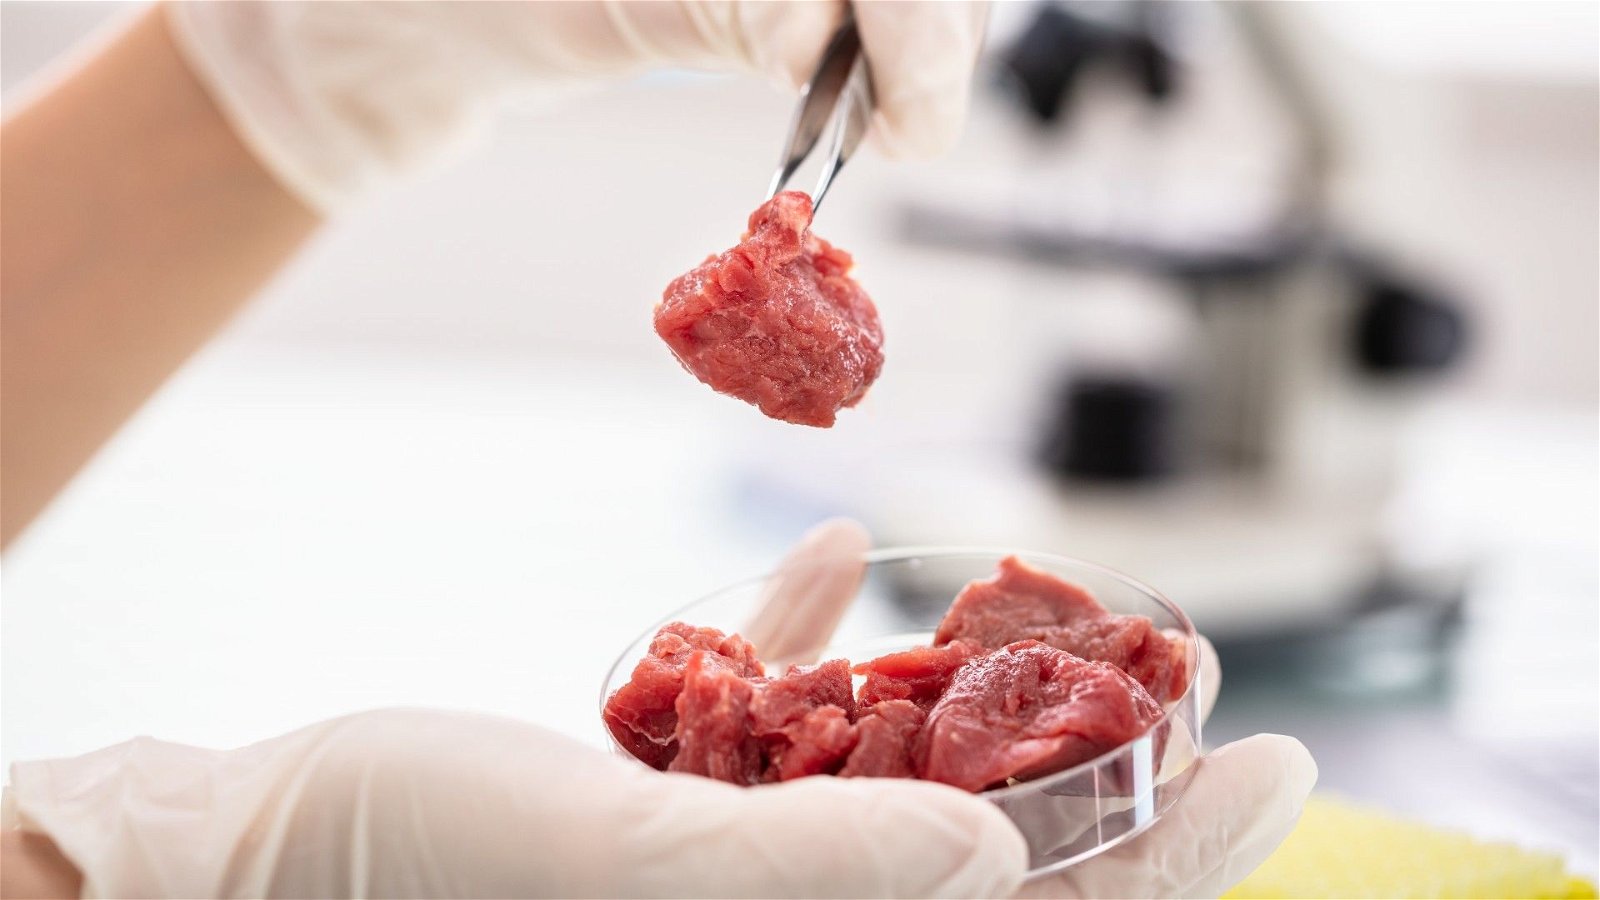 Lab-grown meat: the new trend